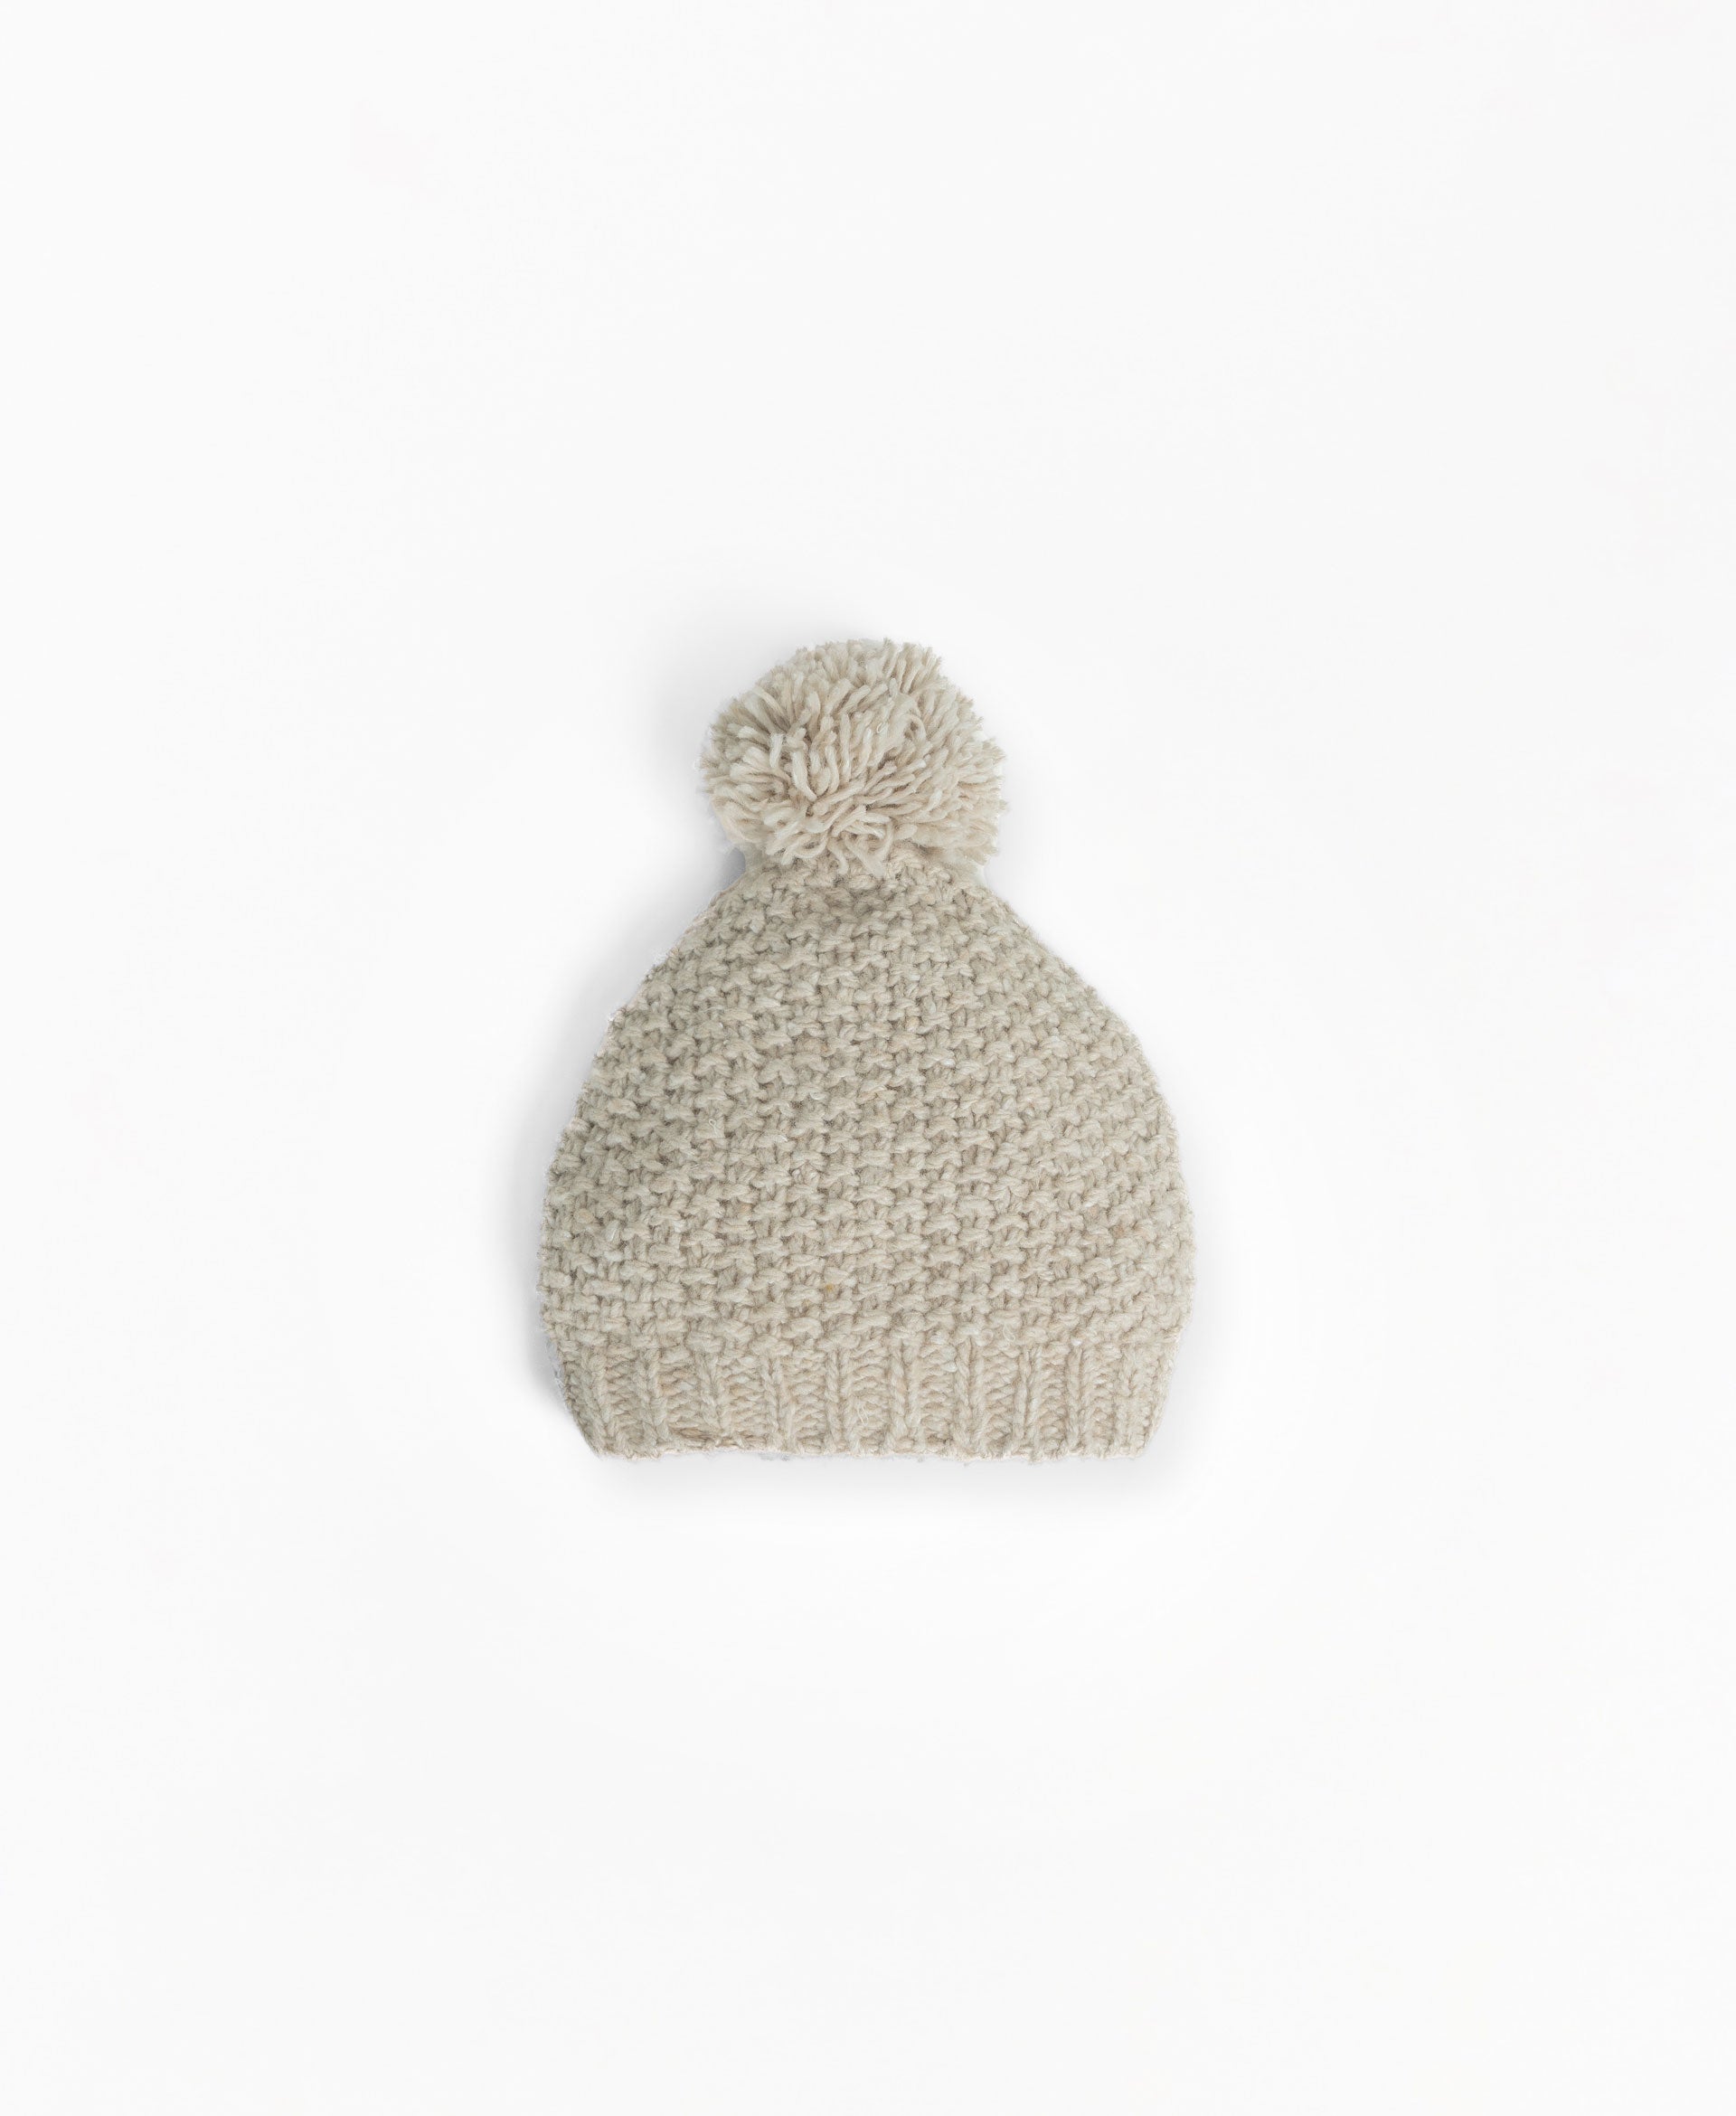 Knitted beanie with pompom on top